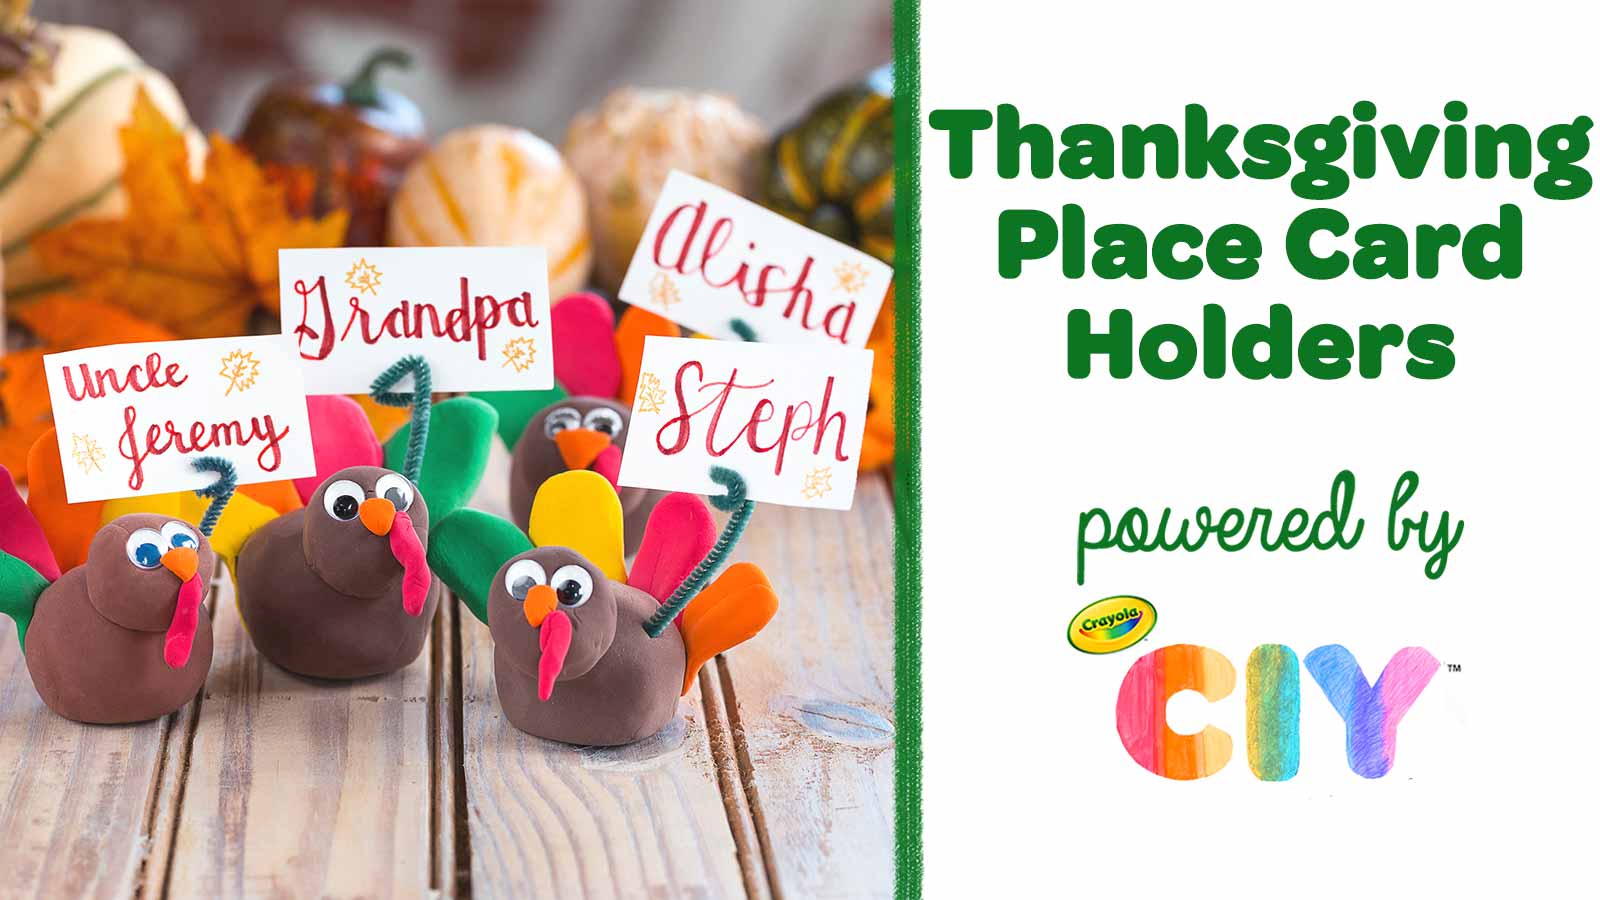 Thanksgiving Place Card Holders CIY Video Poster Frame